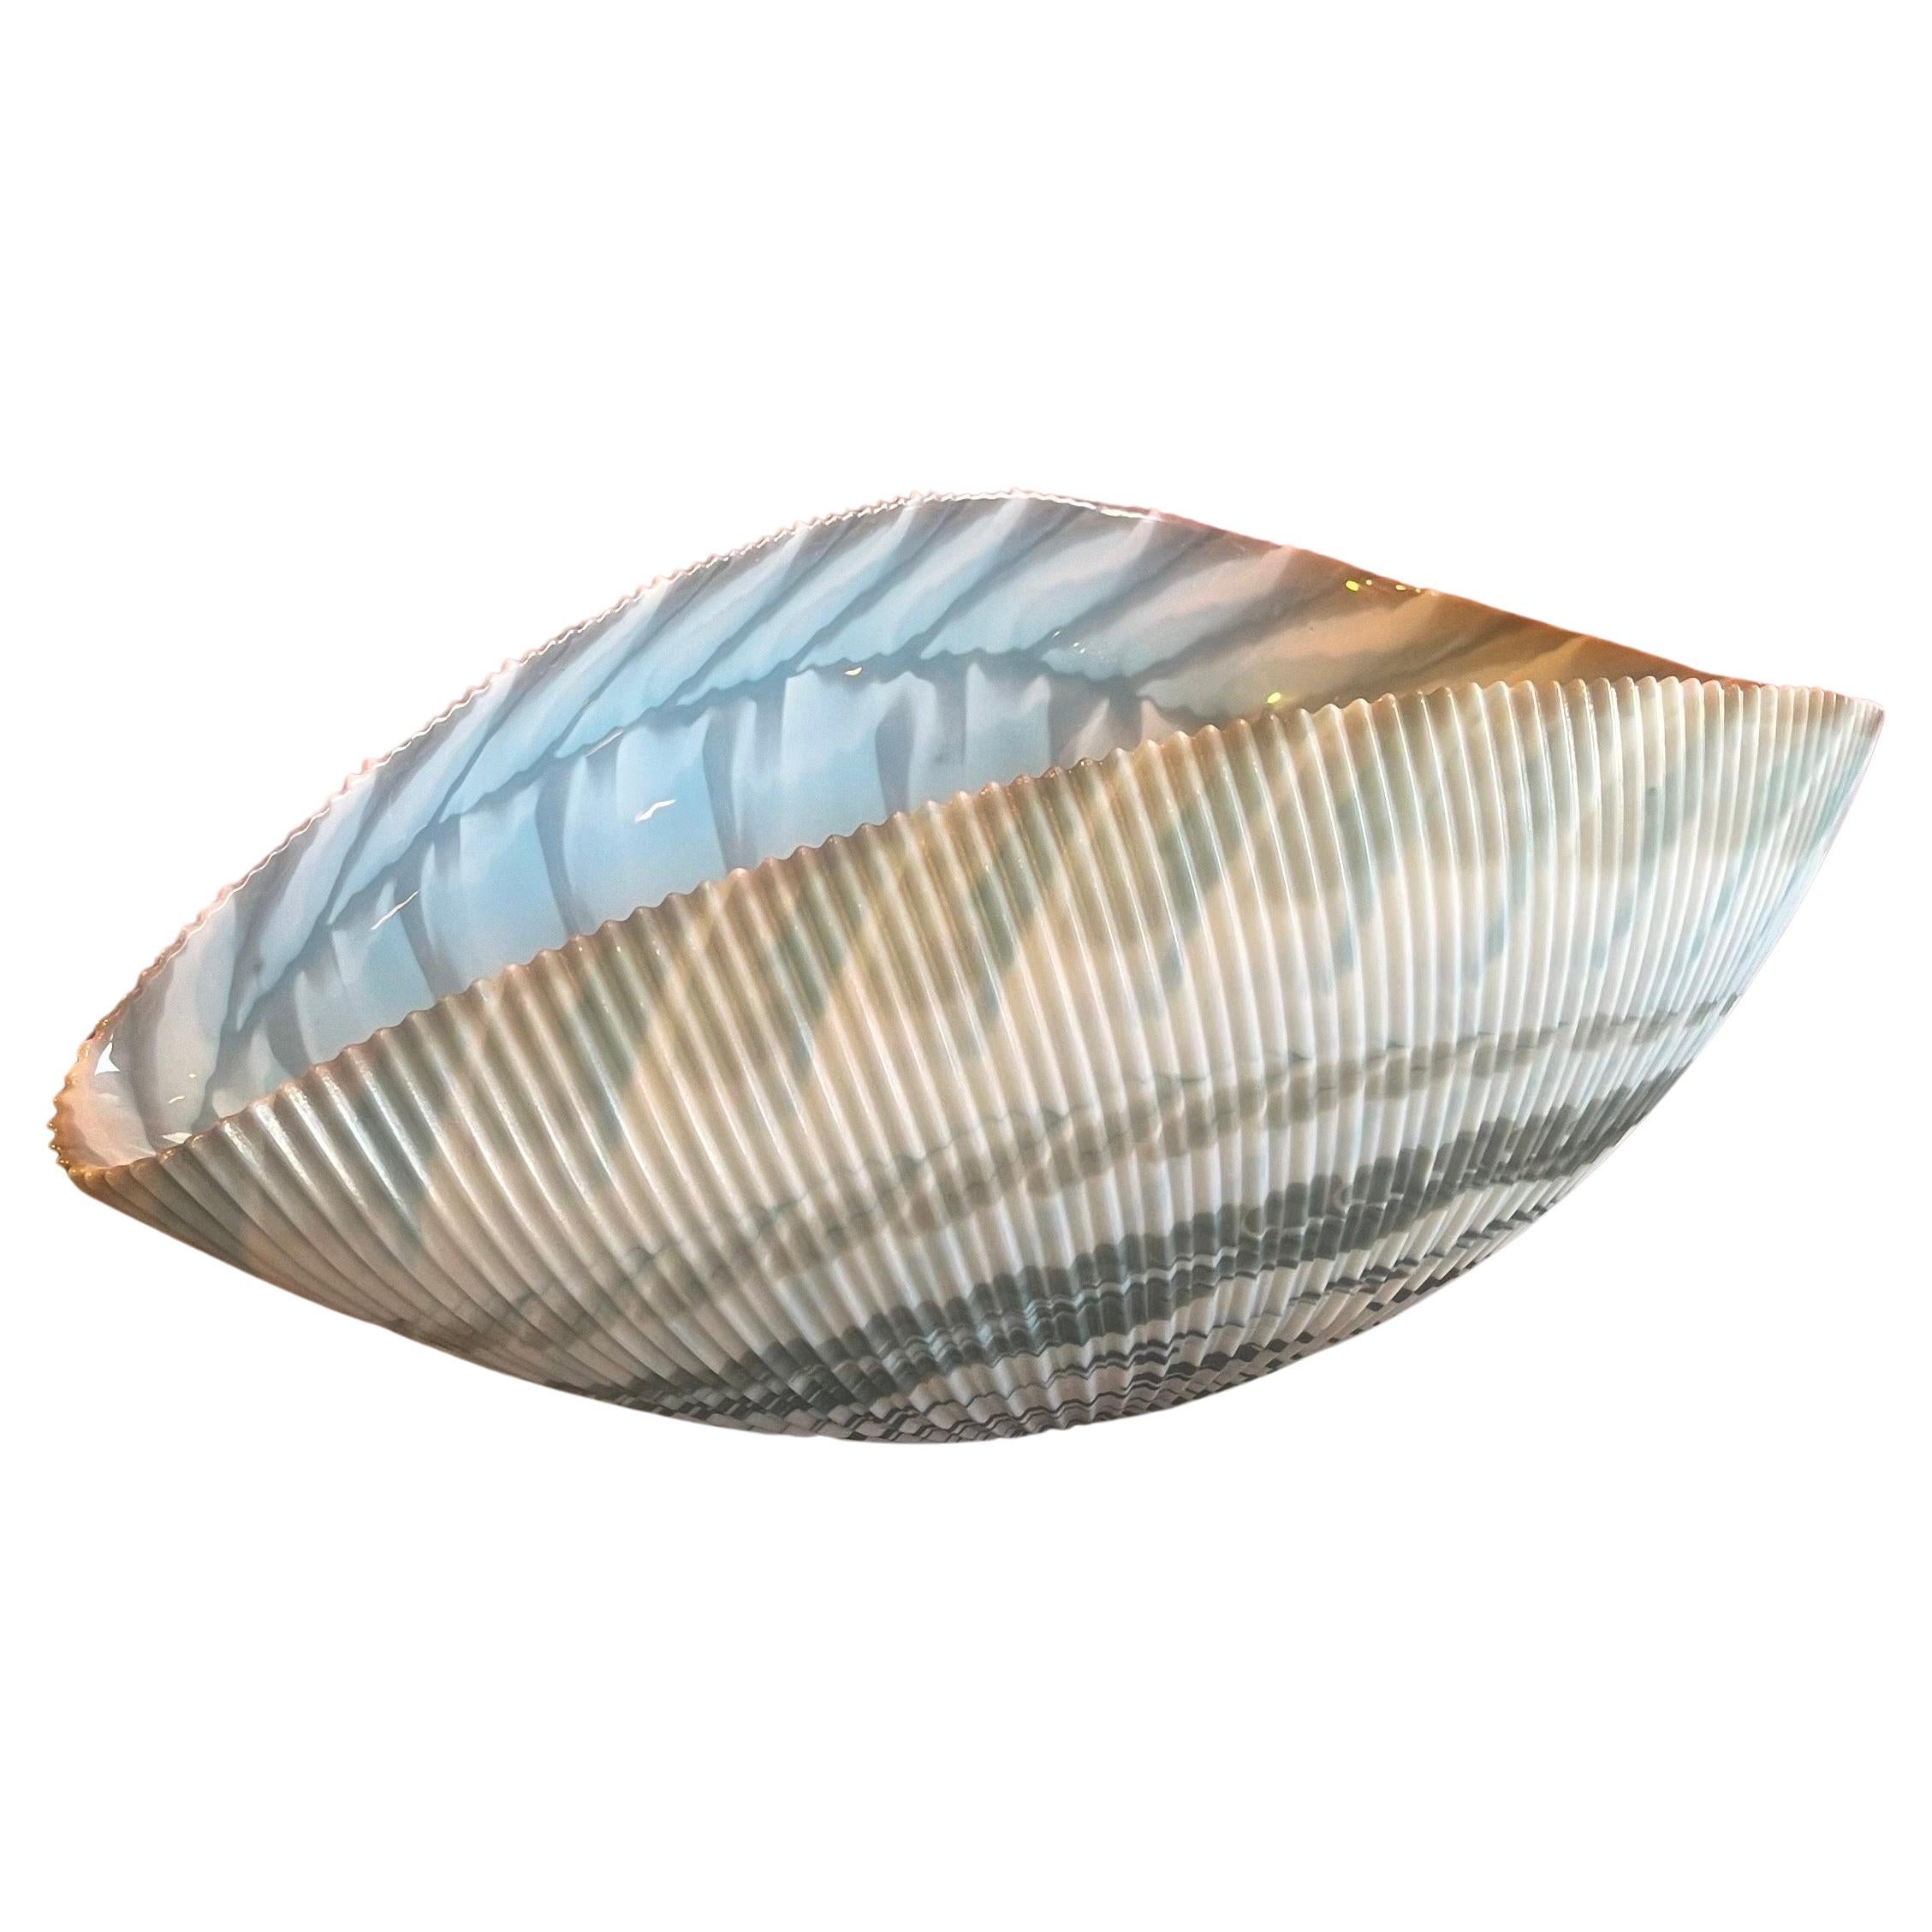 Large "Seashell" Shaped Centerpiece Bowl by Yalos for Murano Glass